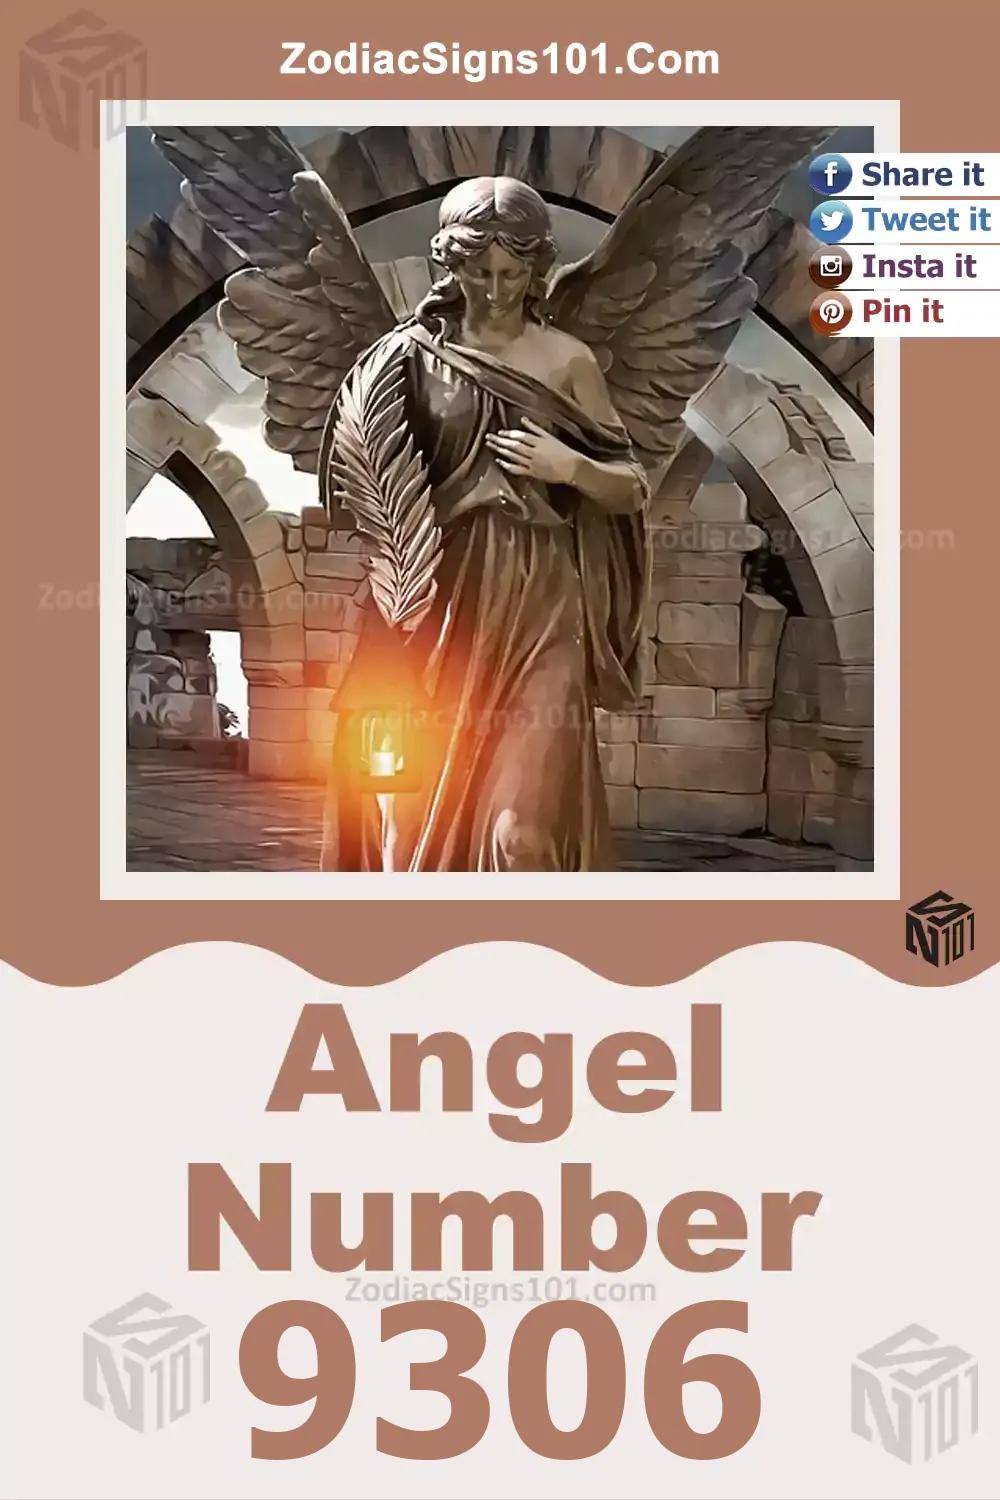 9306 Angel Number Meaning